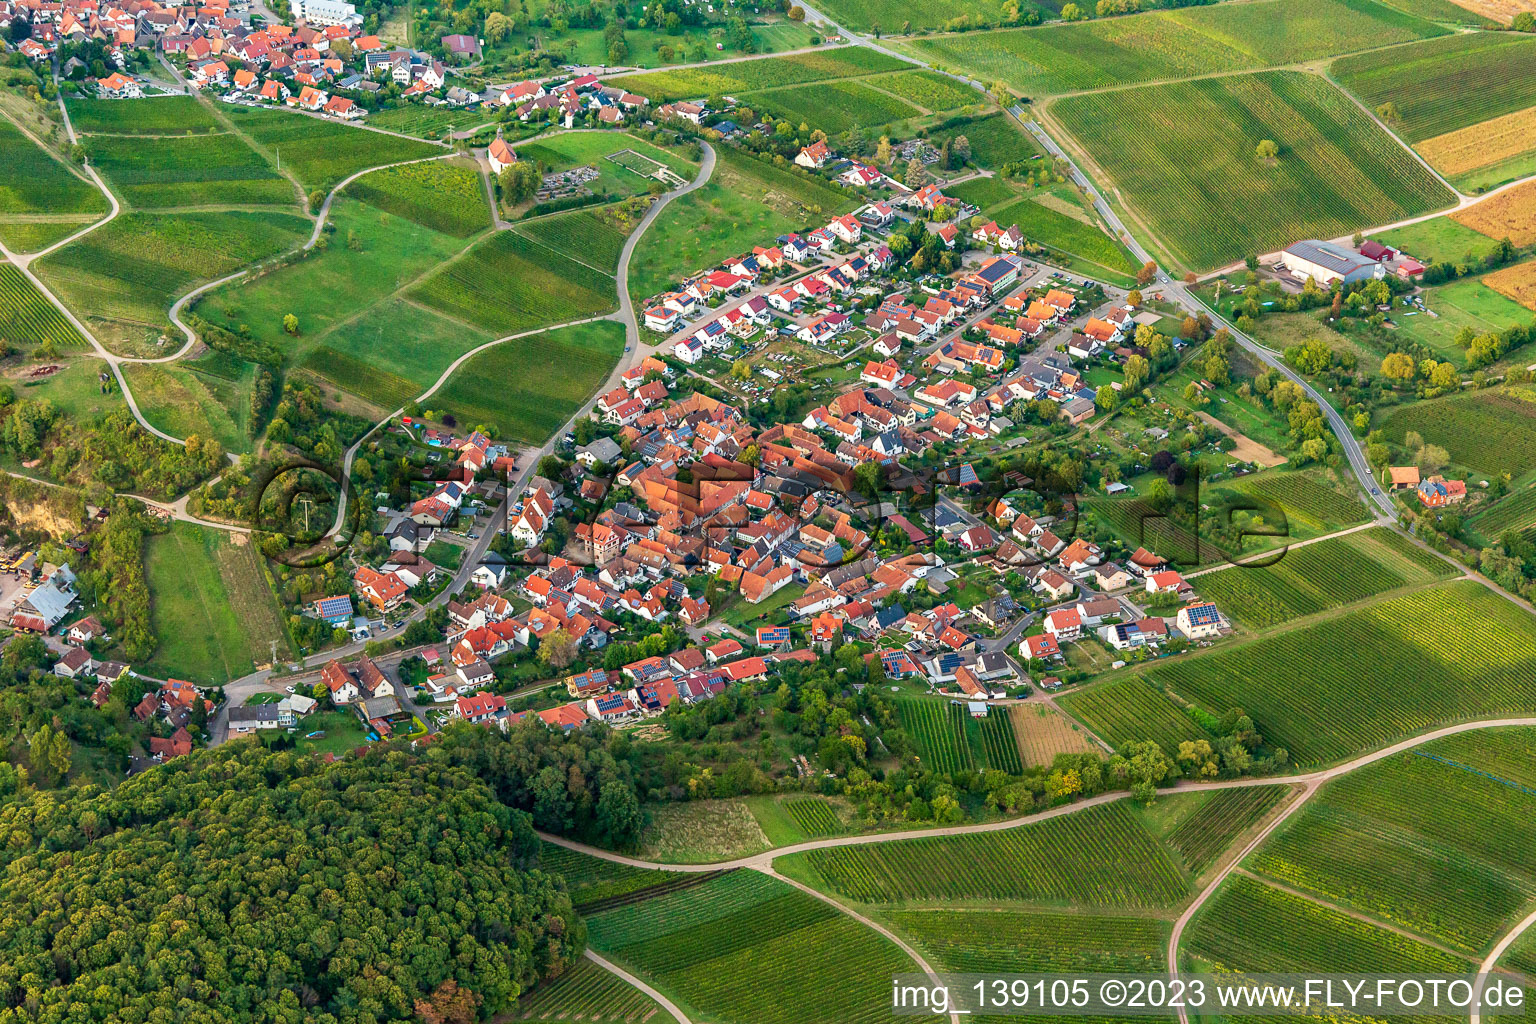 District Gleishorbach in Gleiszellen-Gleishorbach in the state Rhineland-Palatinate, Germany seen from a drone